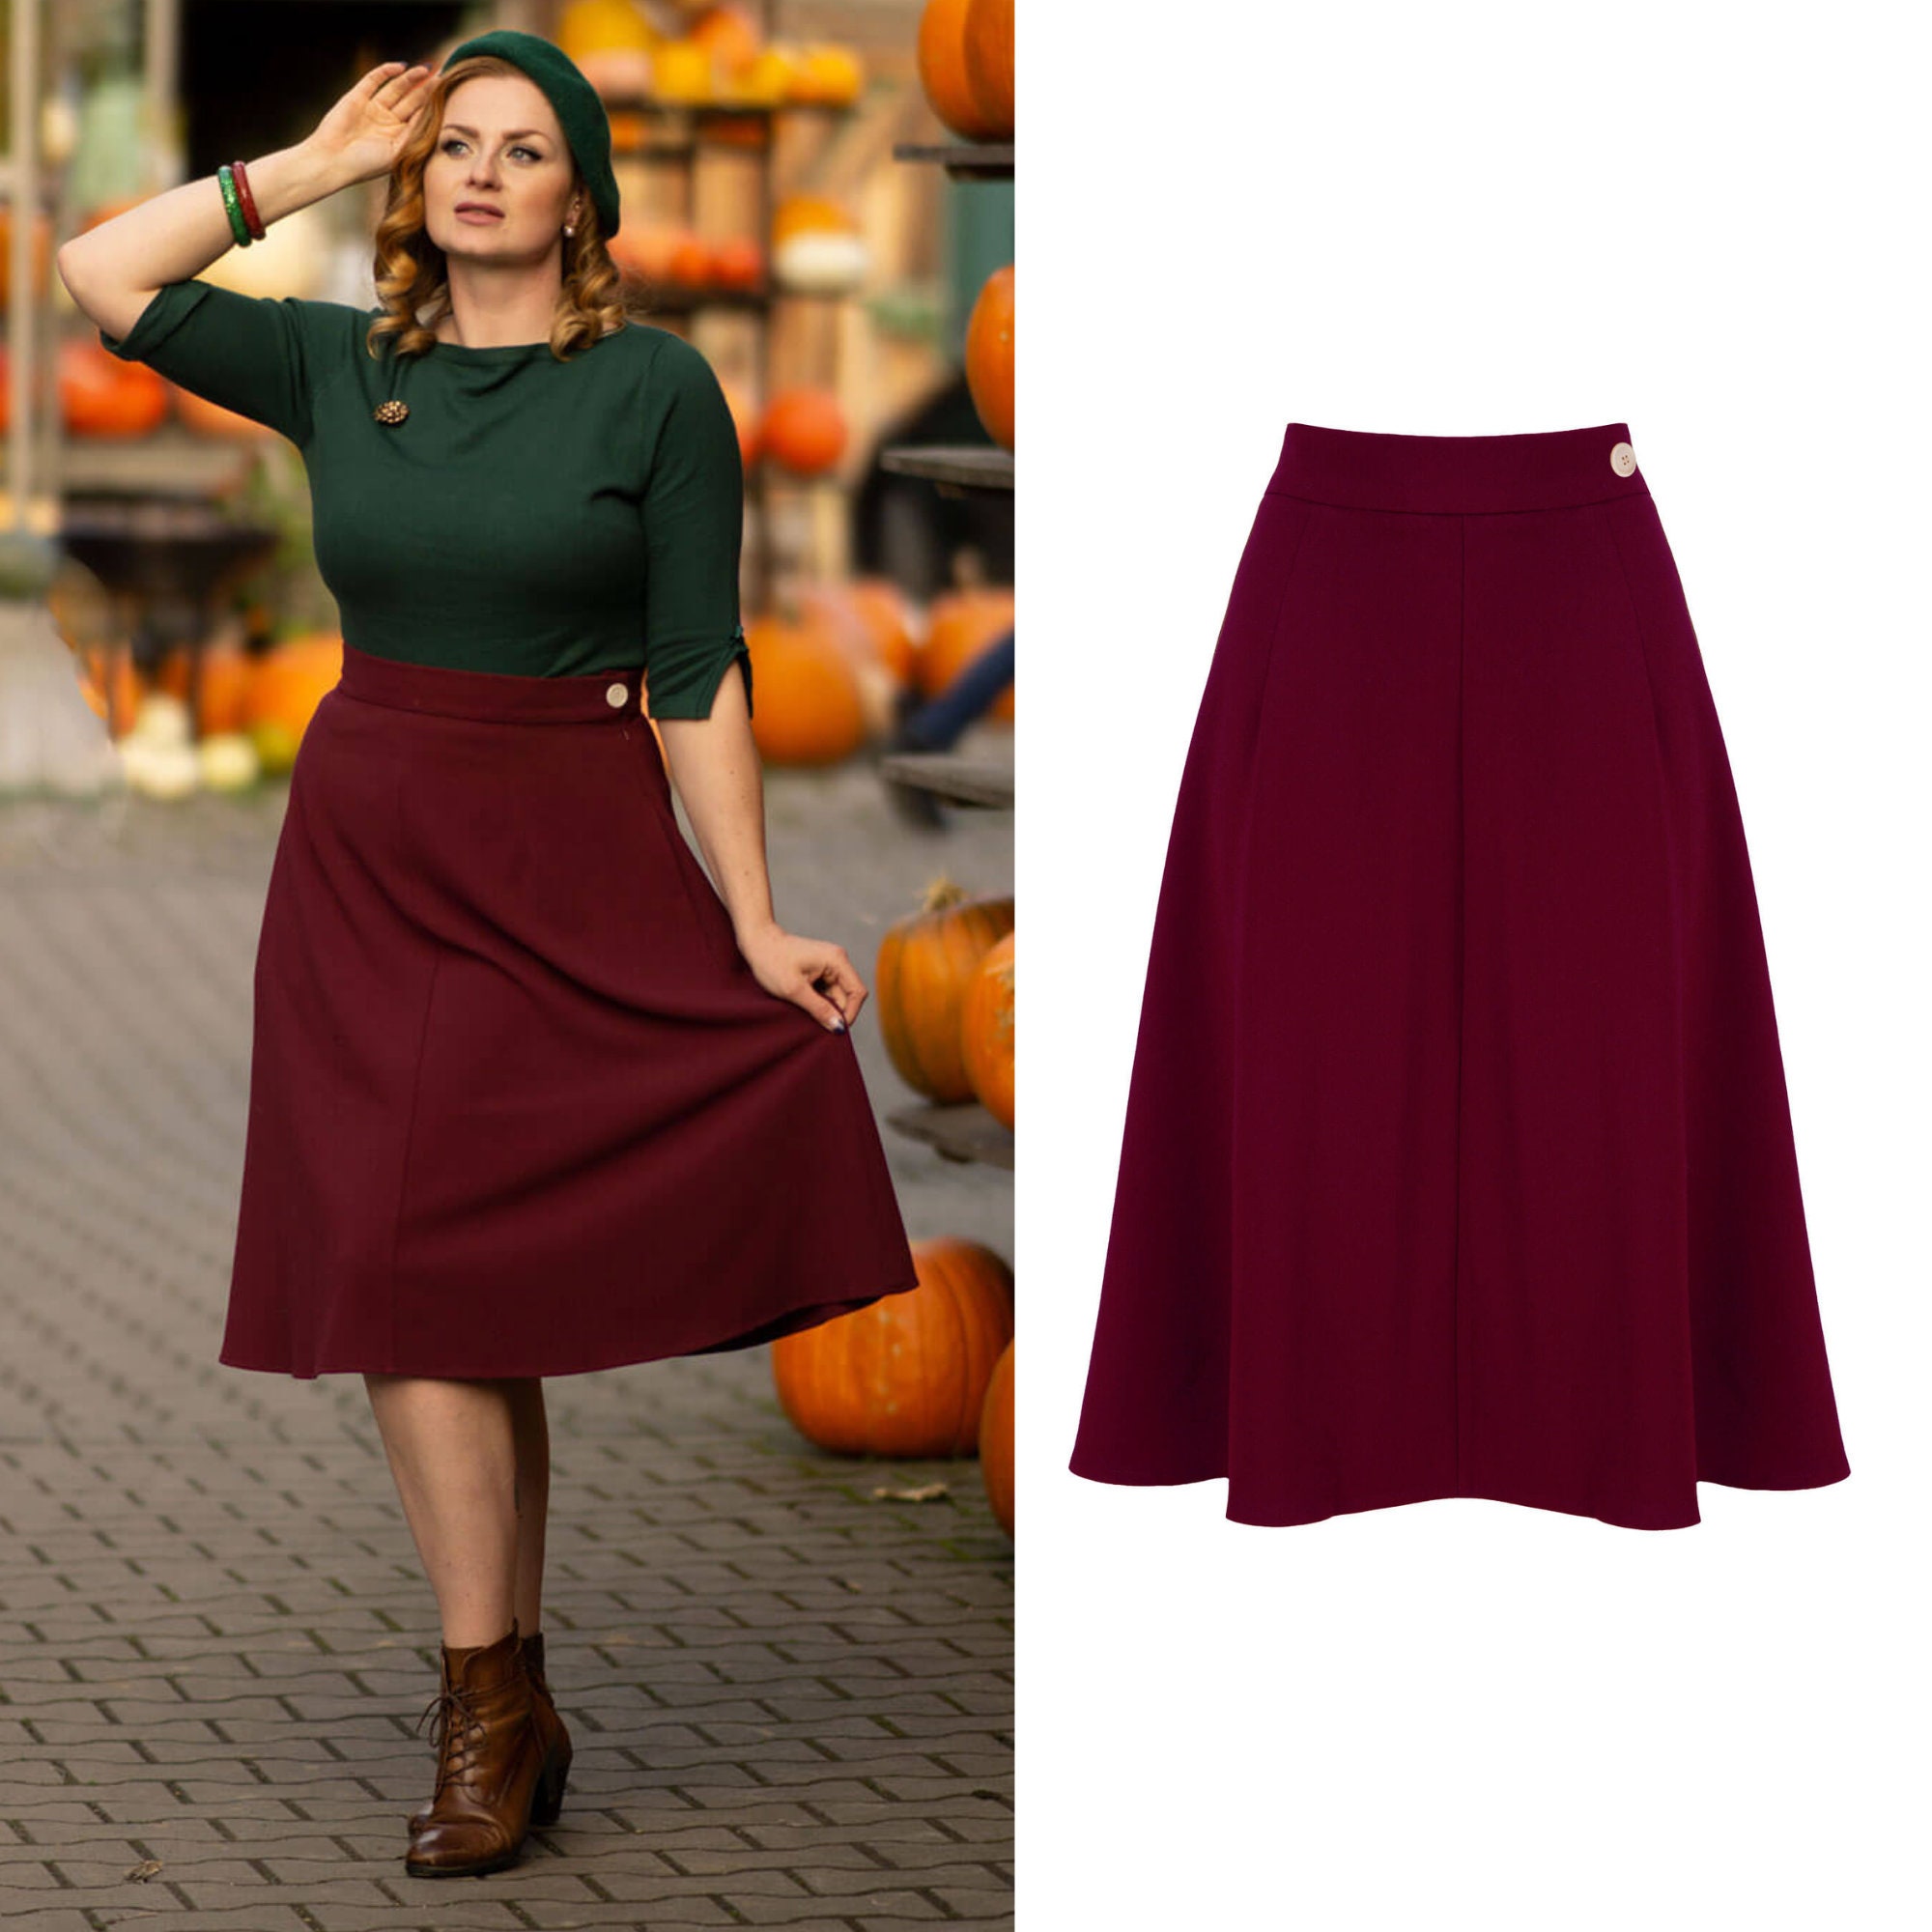 The Complete Skirt Guide for Women With a Belly